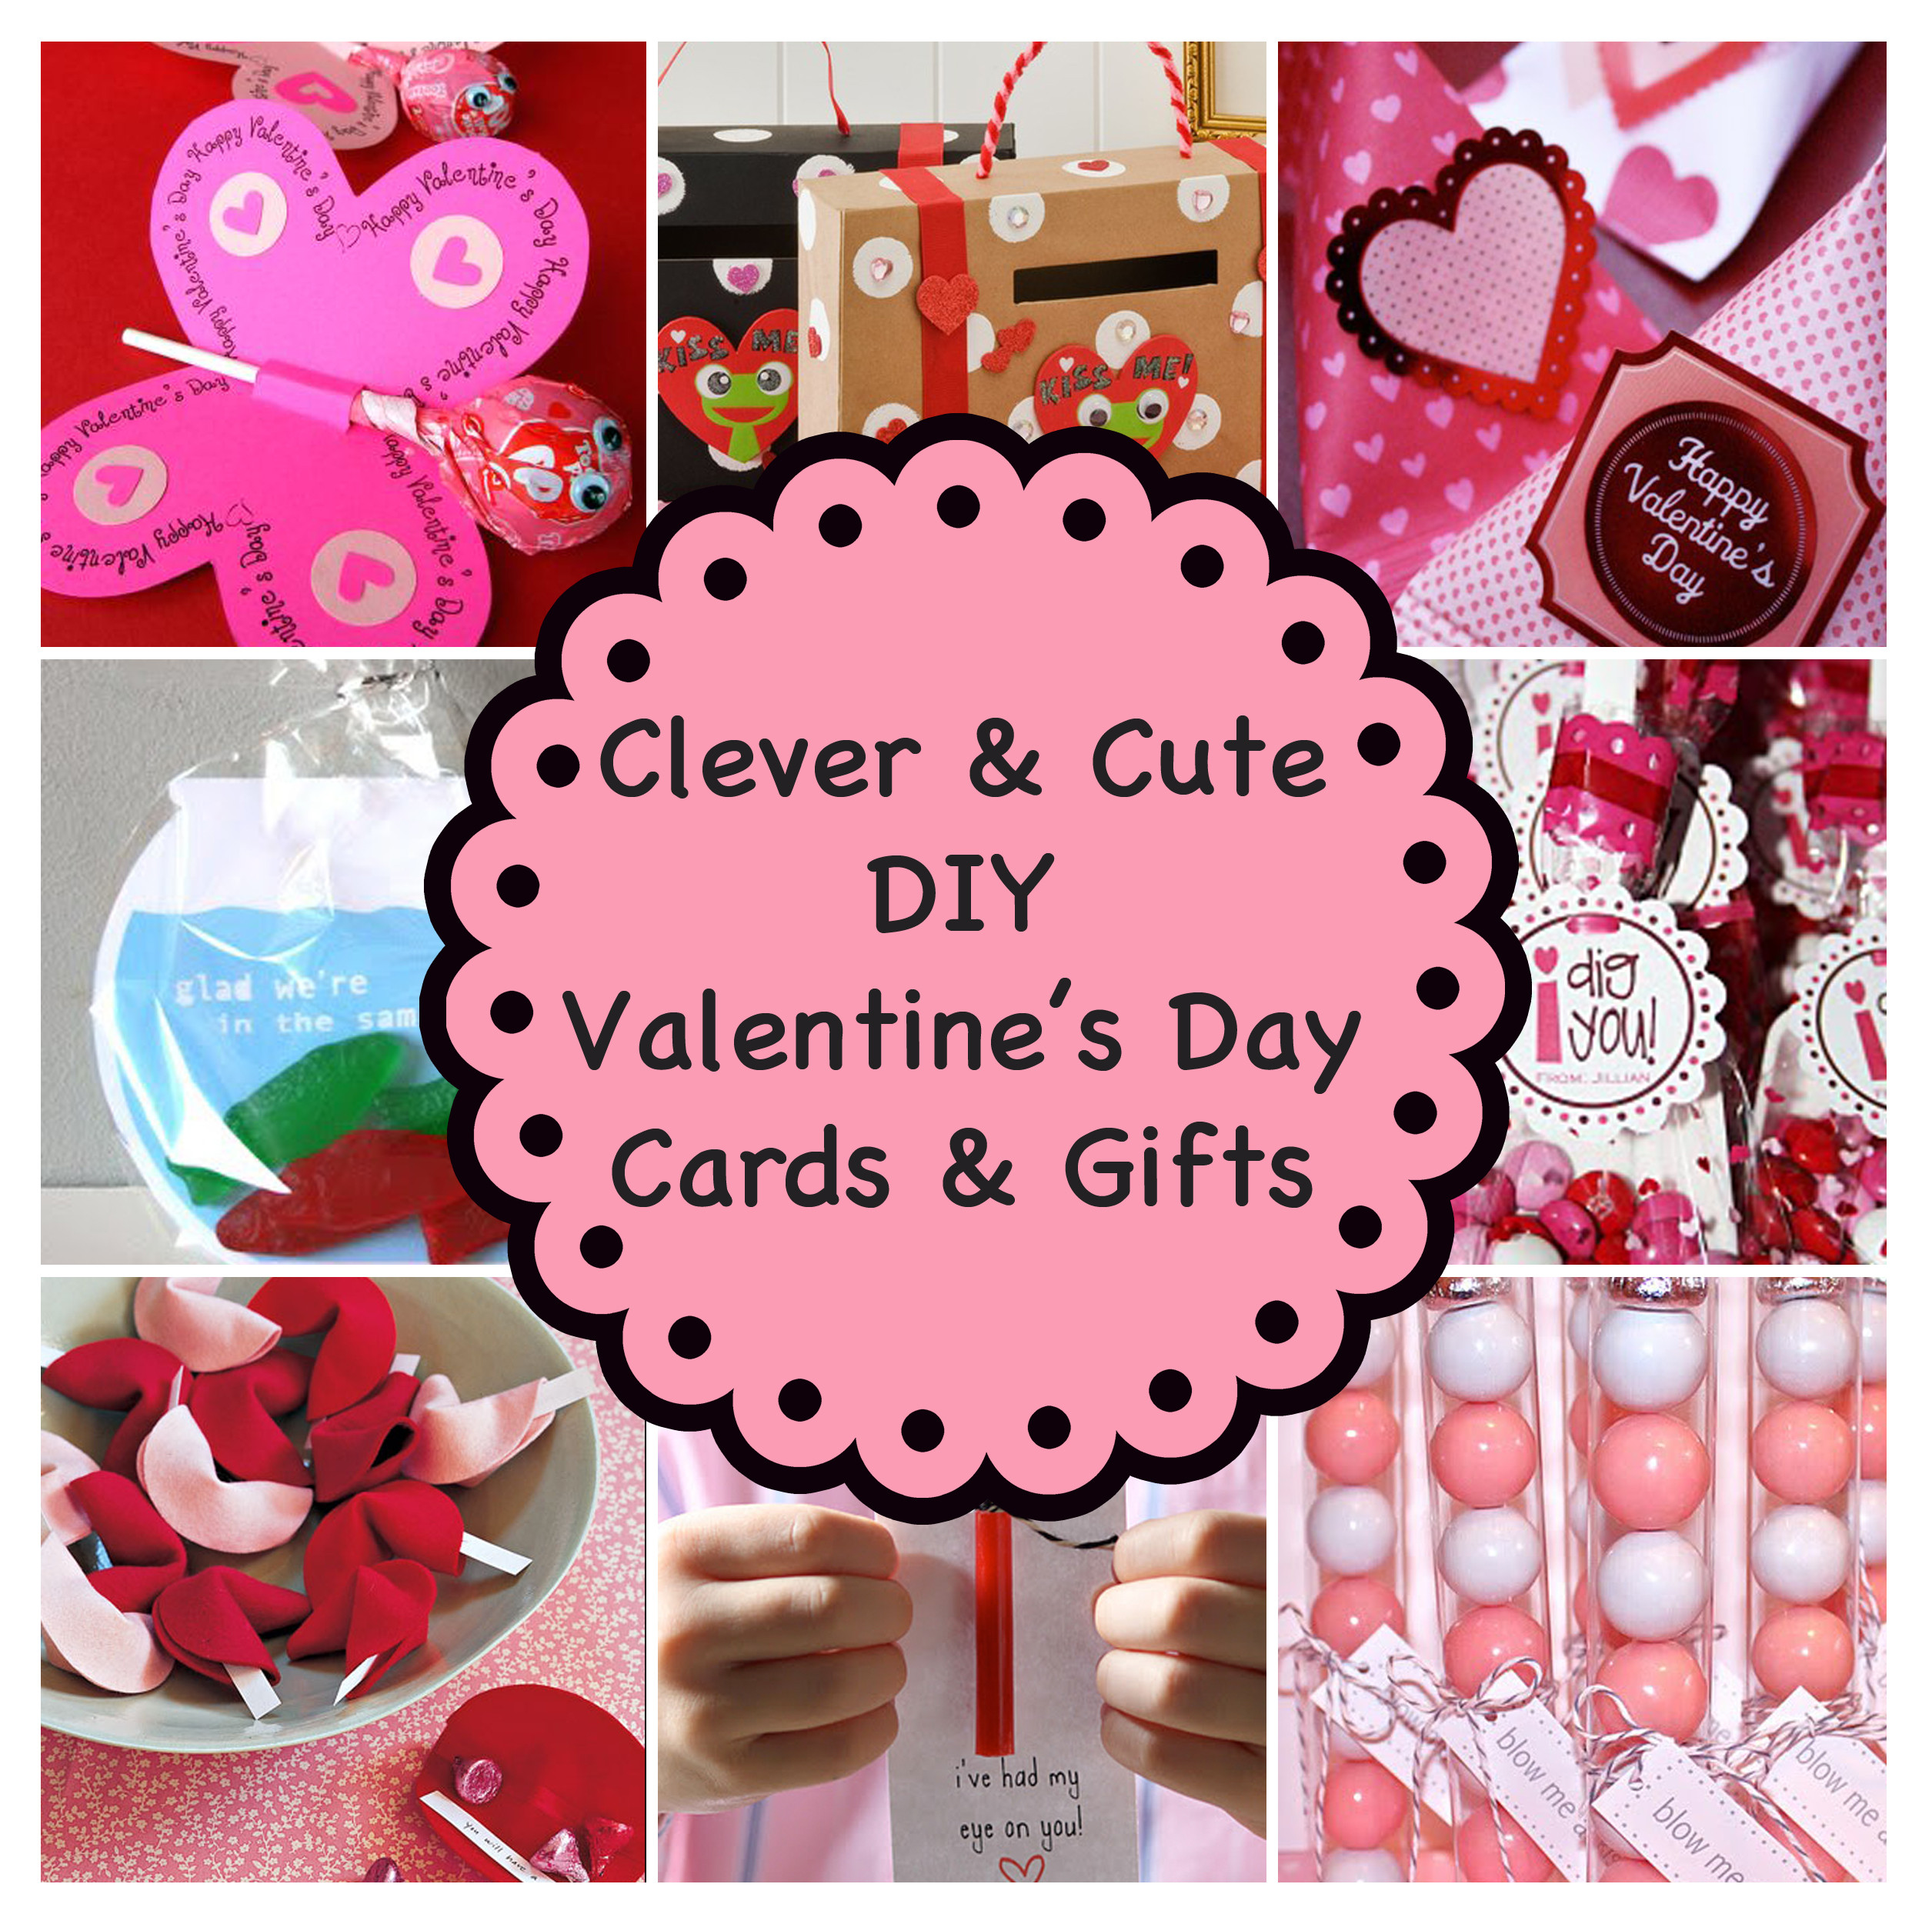 Cute Homemade Valentines Day Gifts
 Clever and Cute DIY Valentine’s Day Cards & Gifts